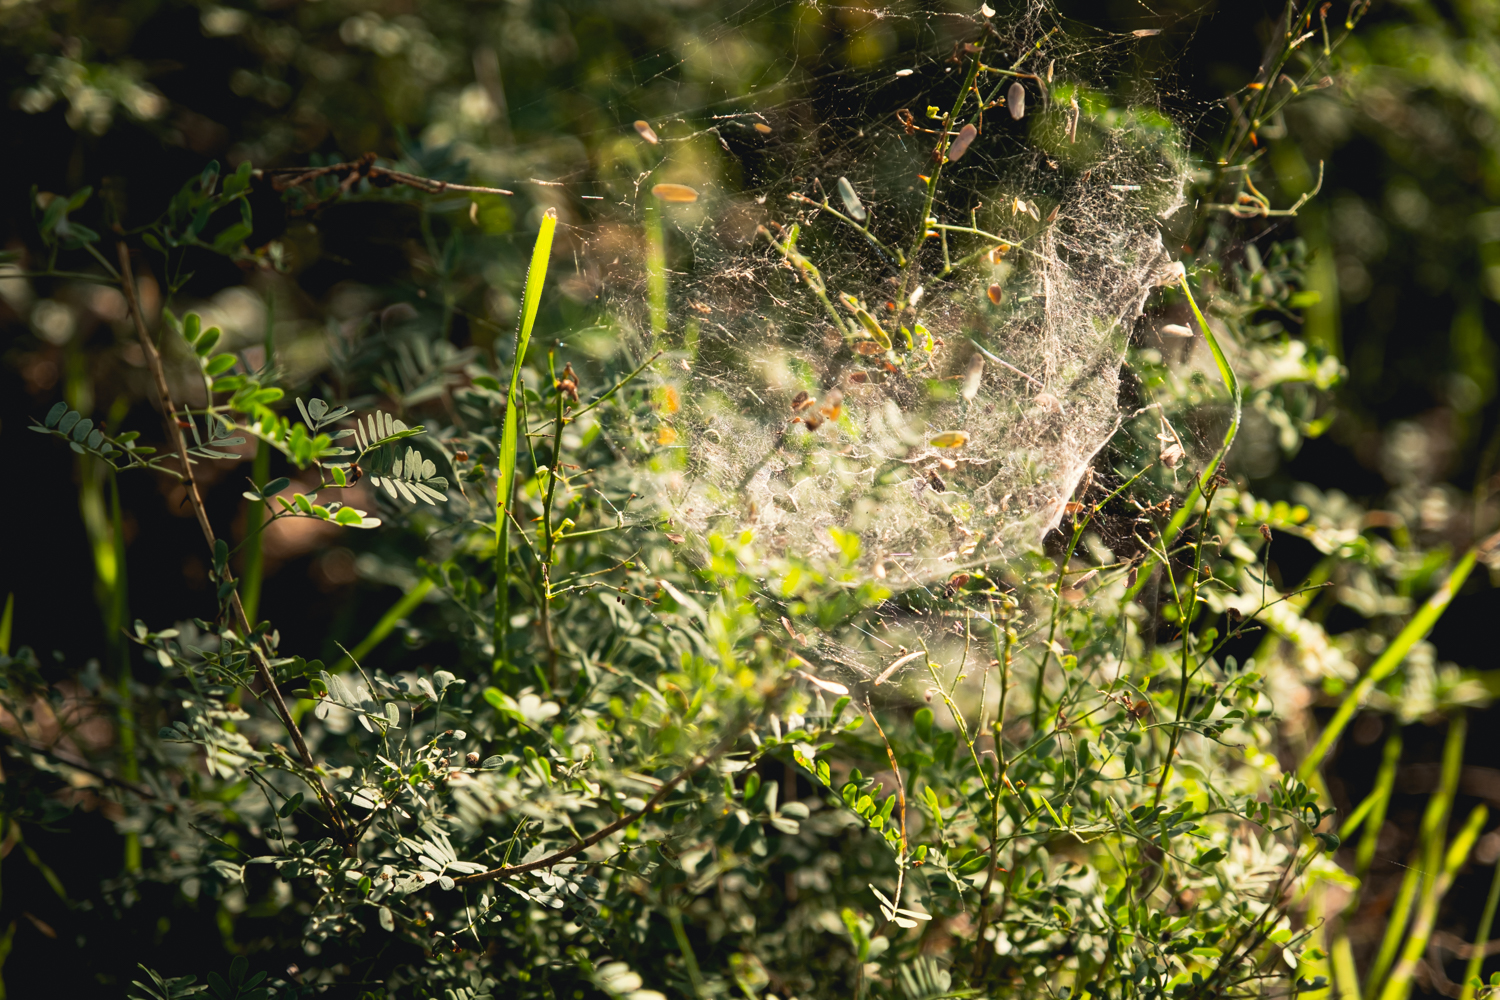 Photograph of spiderwebs in the sunlight,